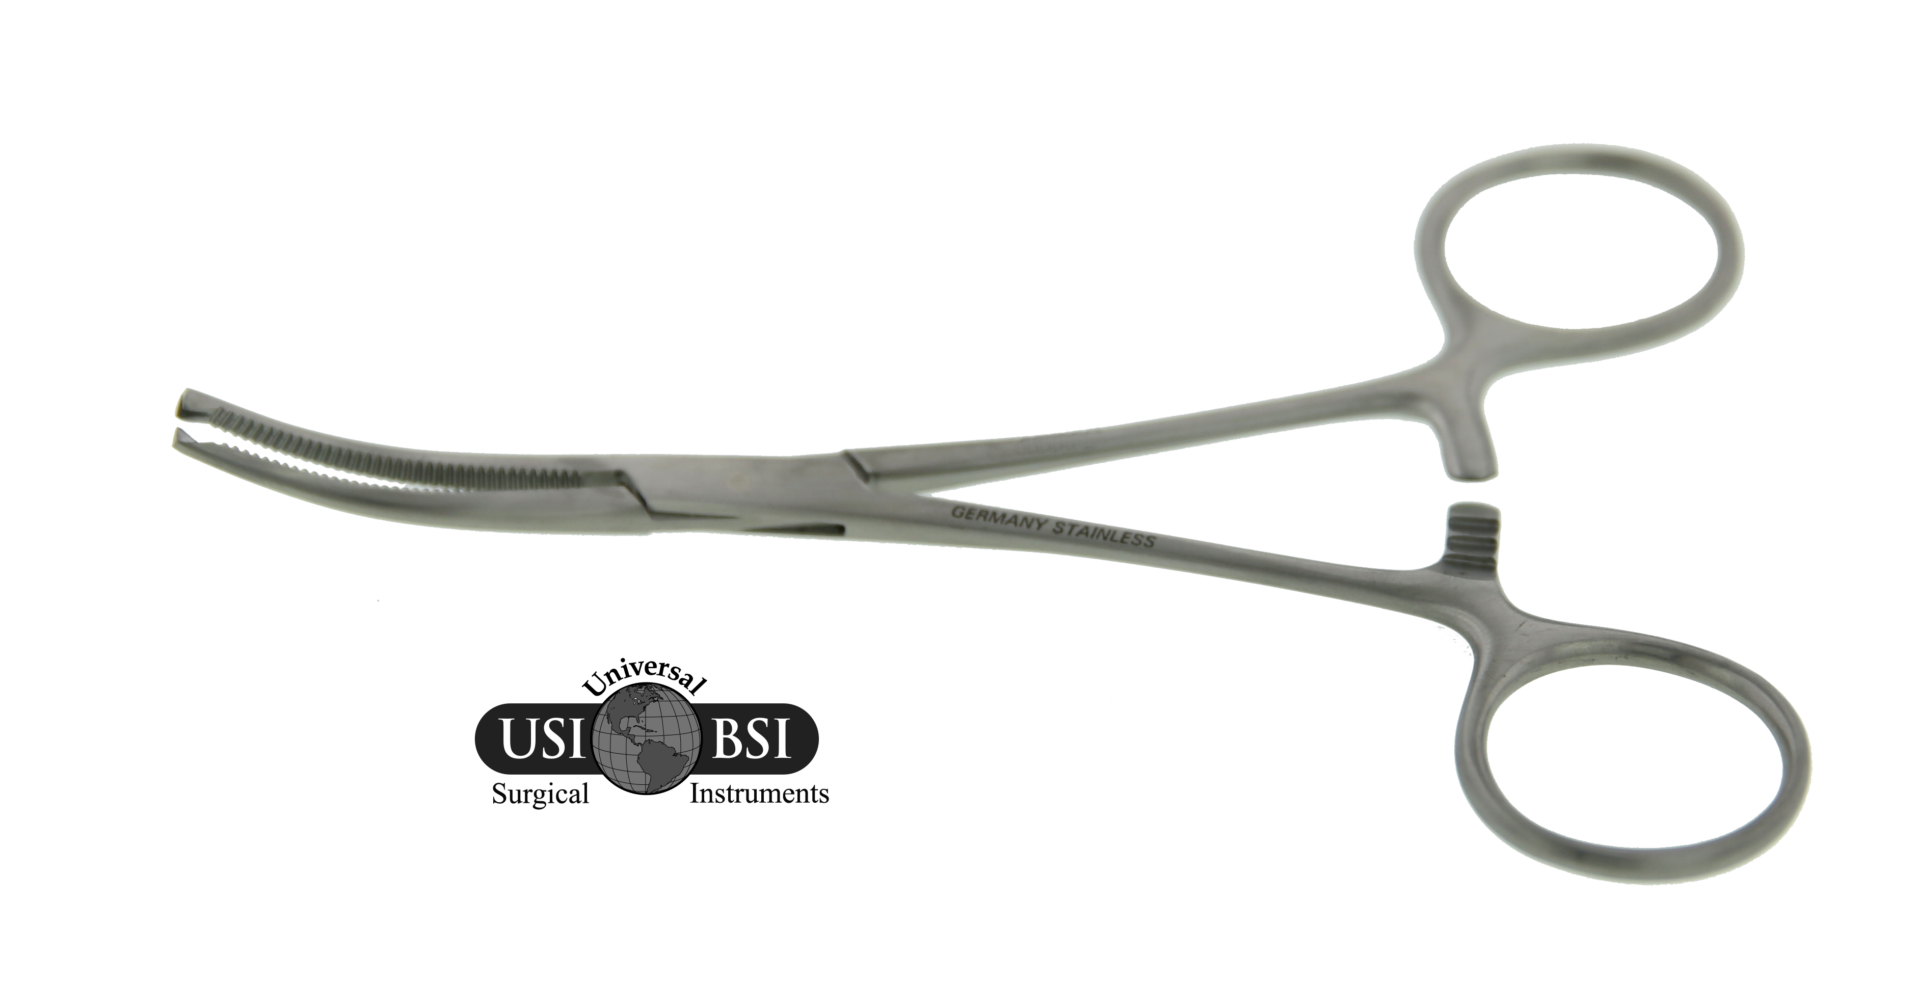 A pair of scissors is shown with the us and bsi logo.